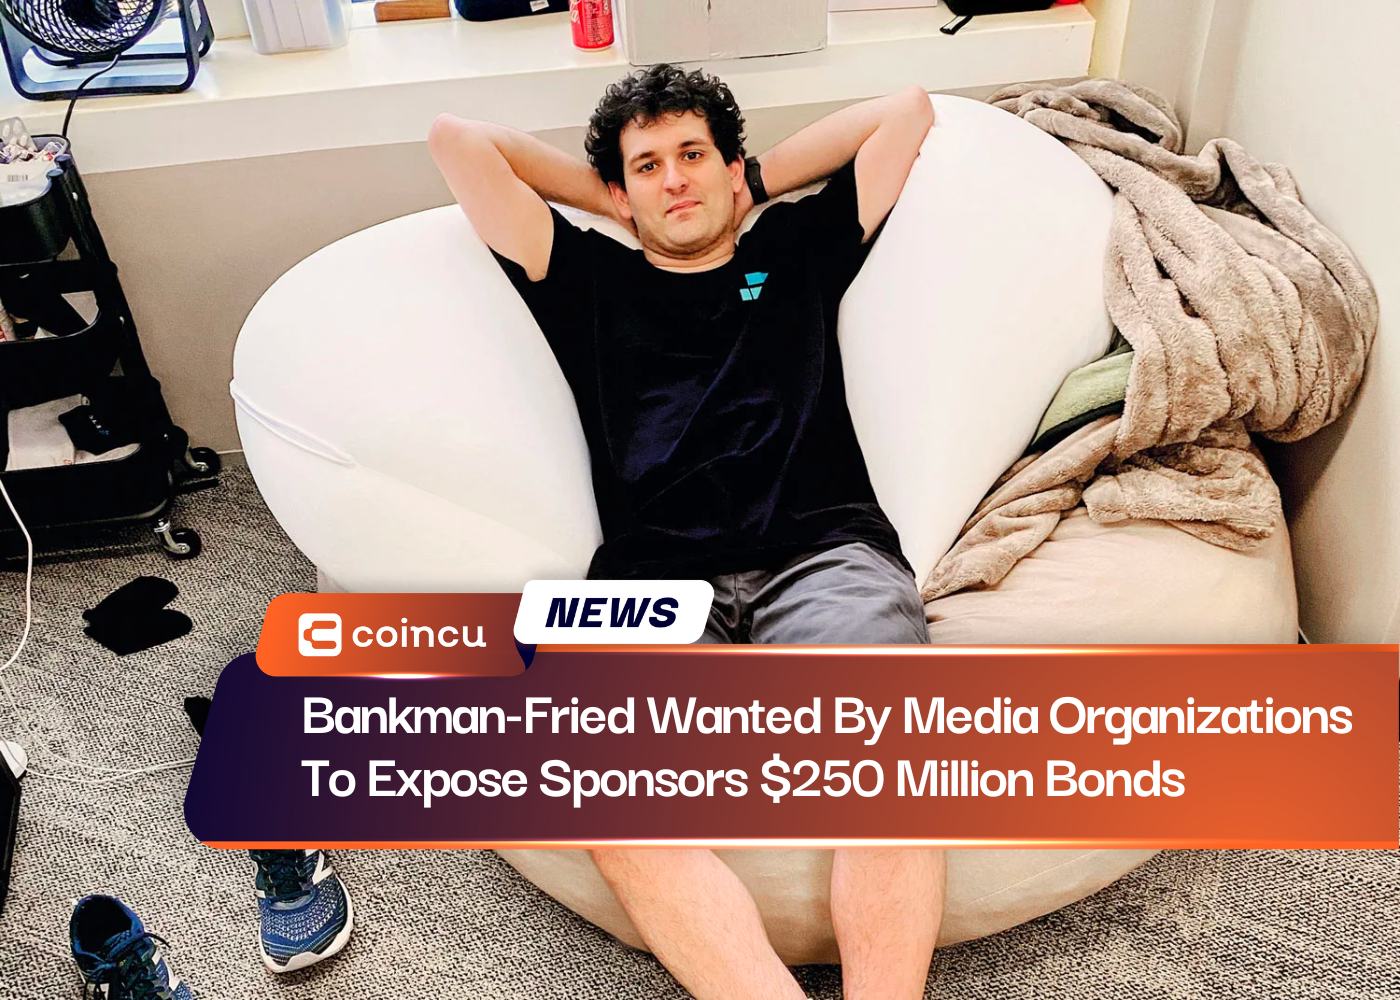 Bankman-Fried Wanted By Media Organizations To Expose Sponsors $250 Million Bonds